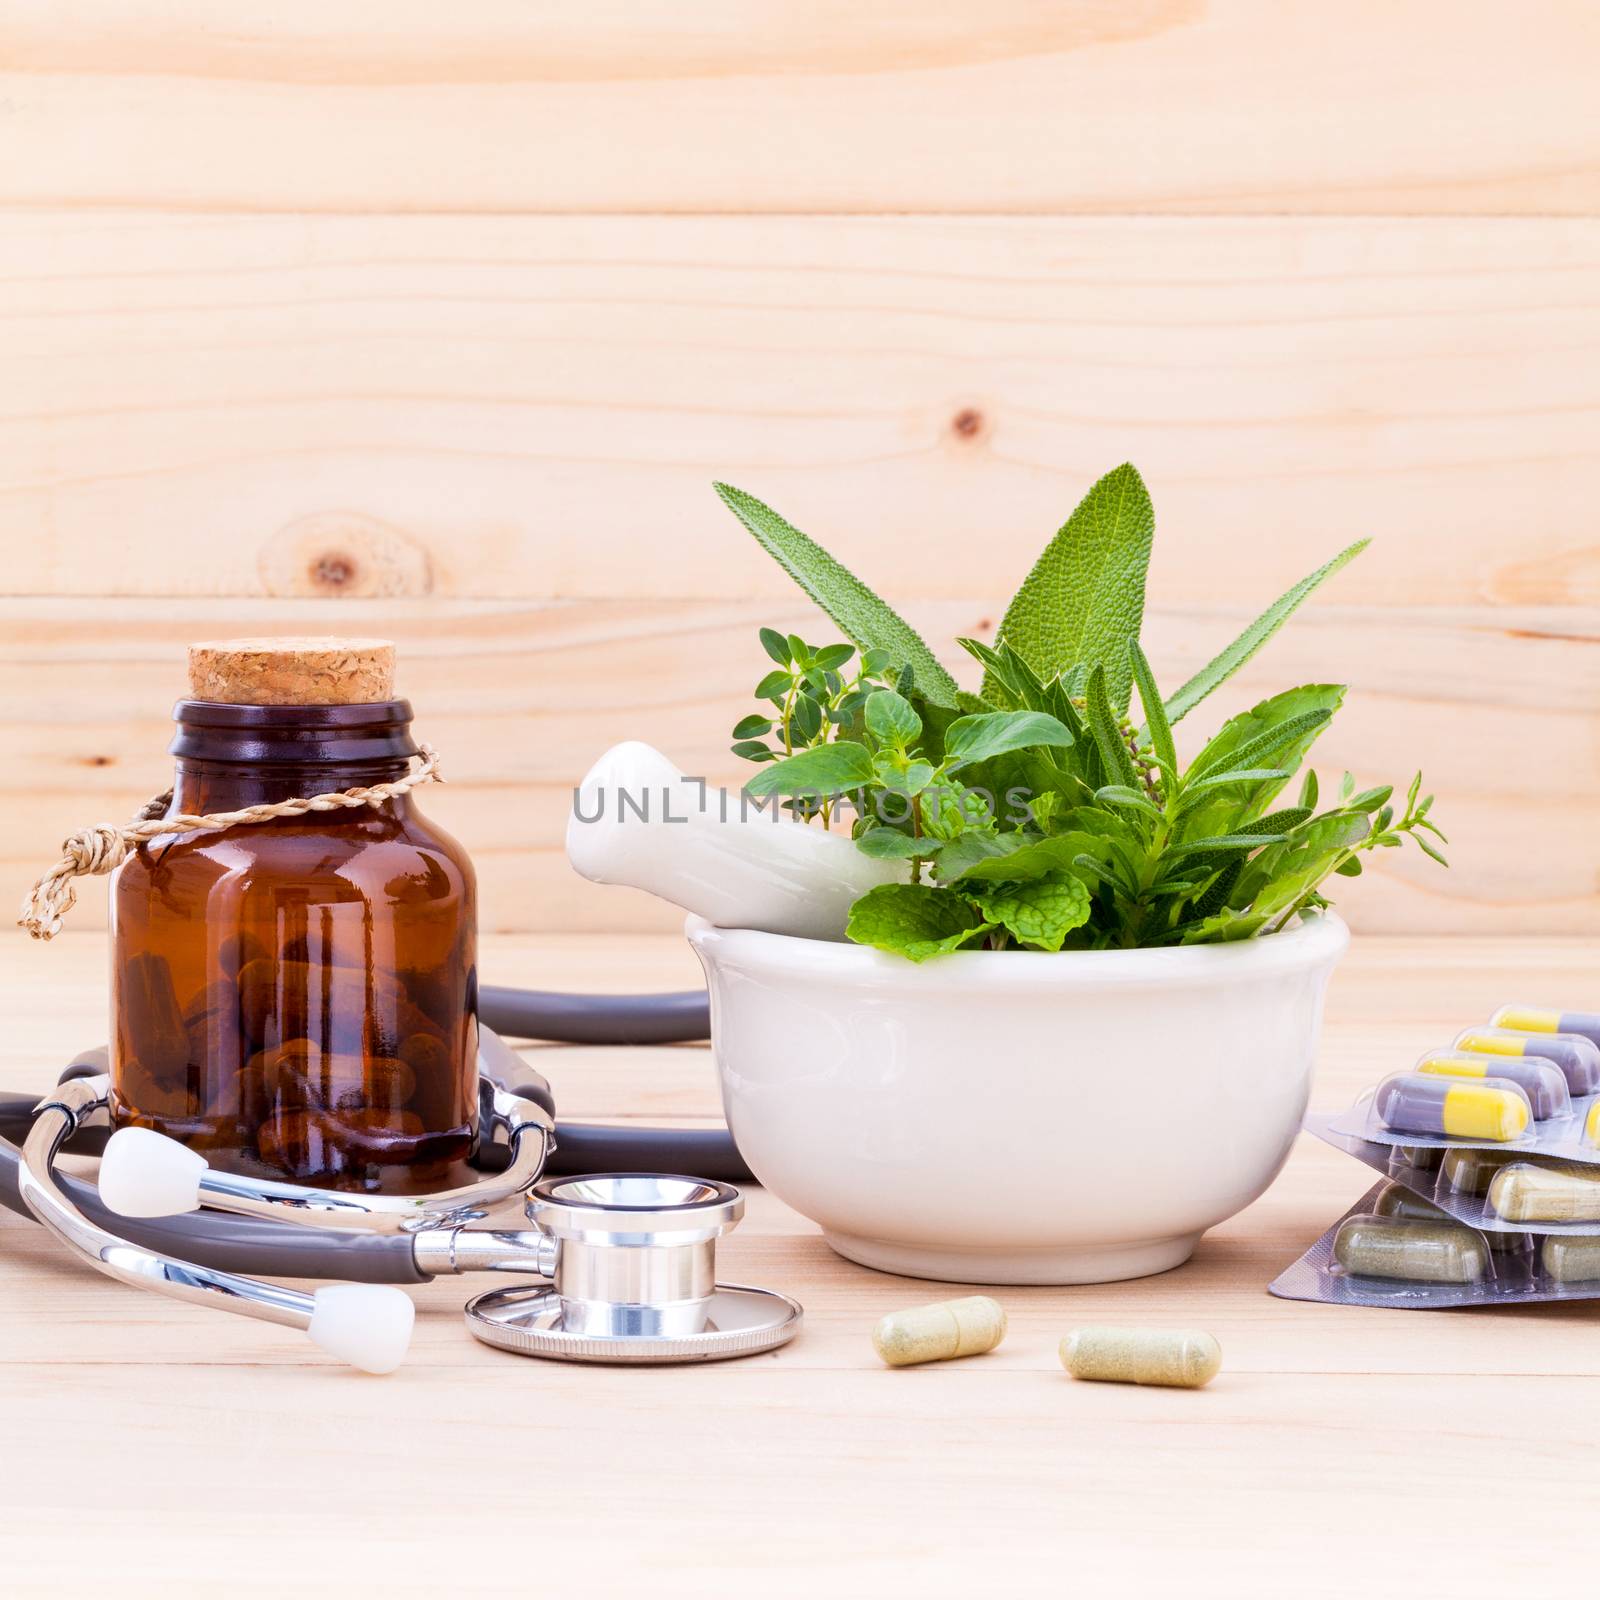 Capsule of herbal medicine alternative healthy care with stethoscope on wooden background.